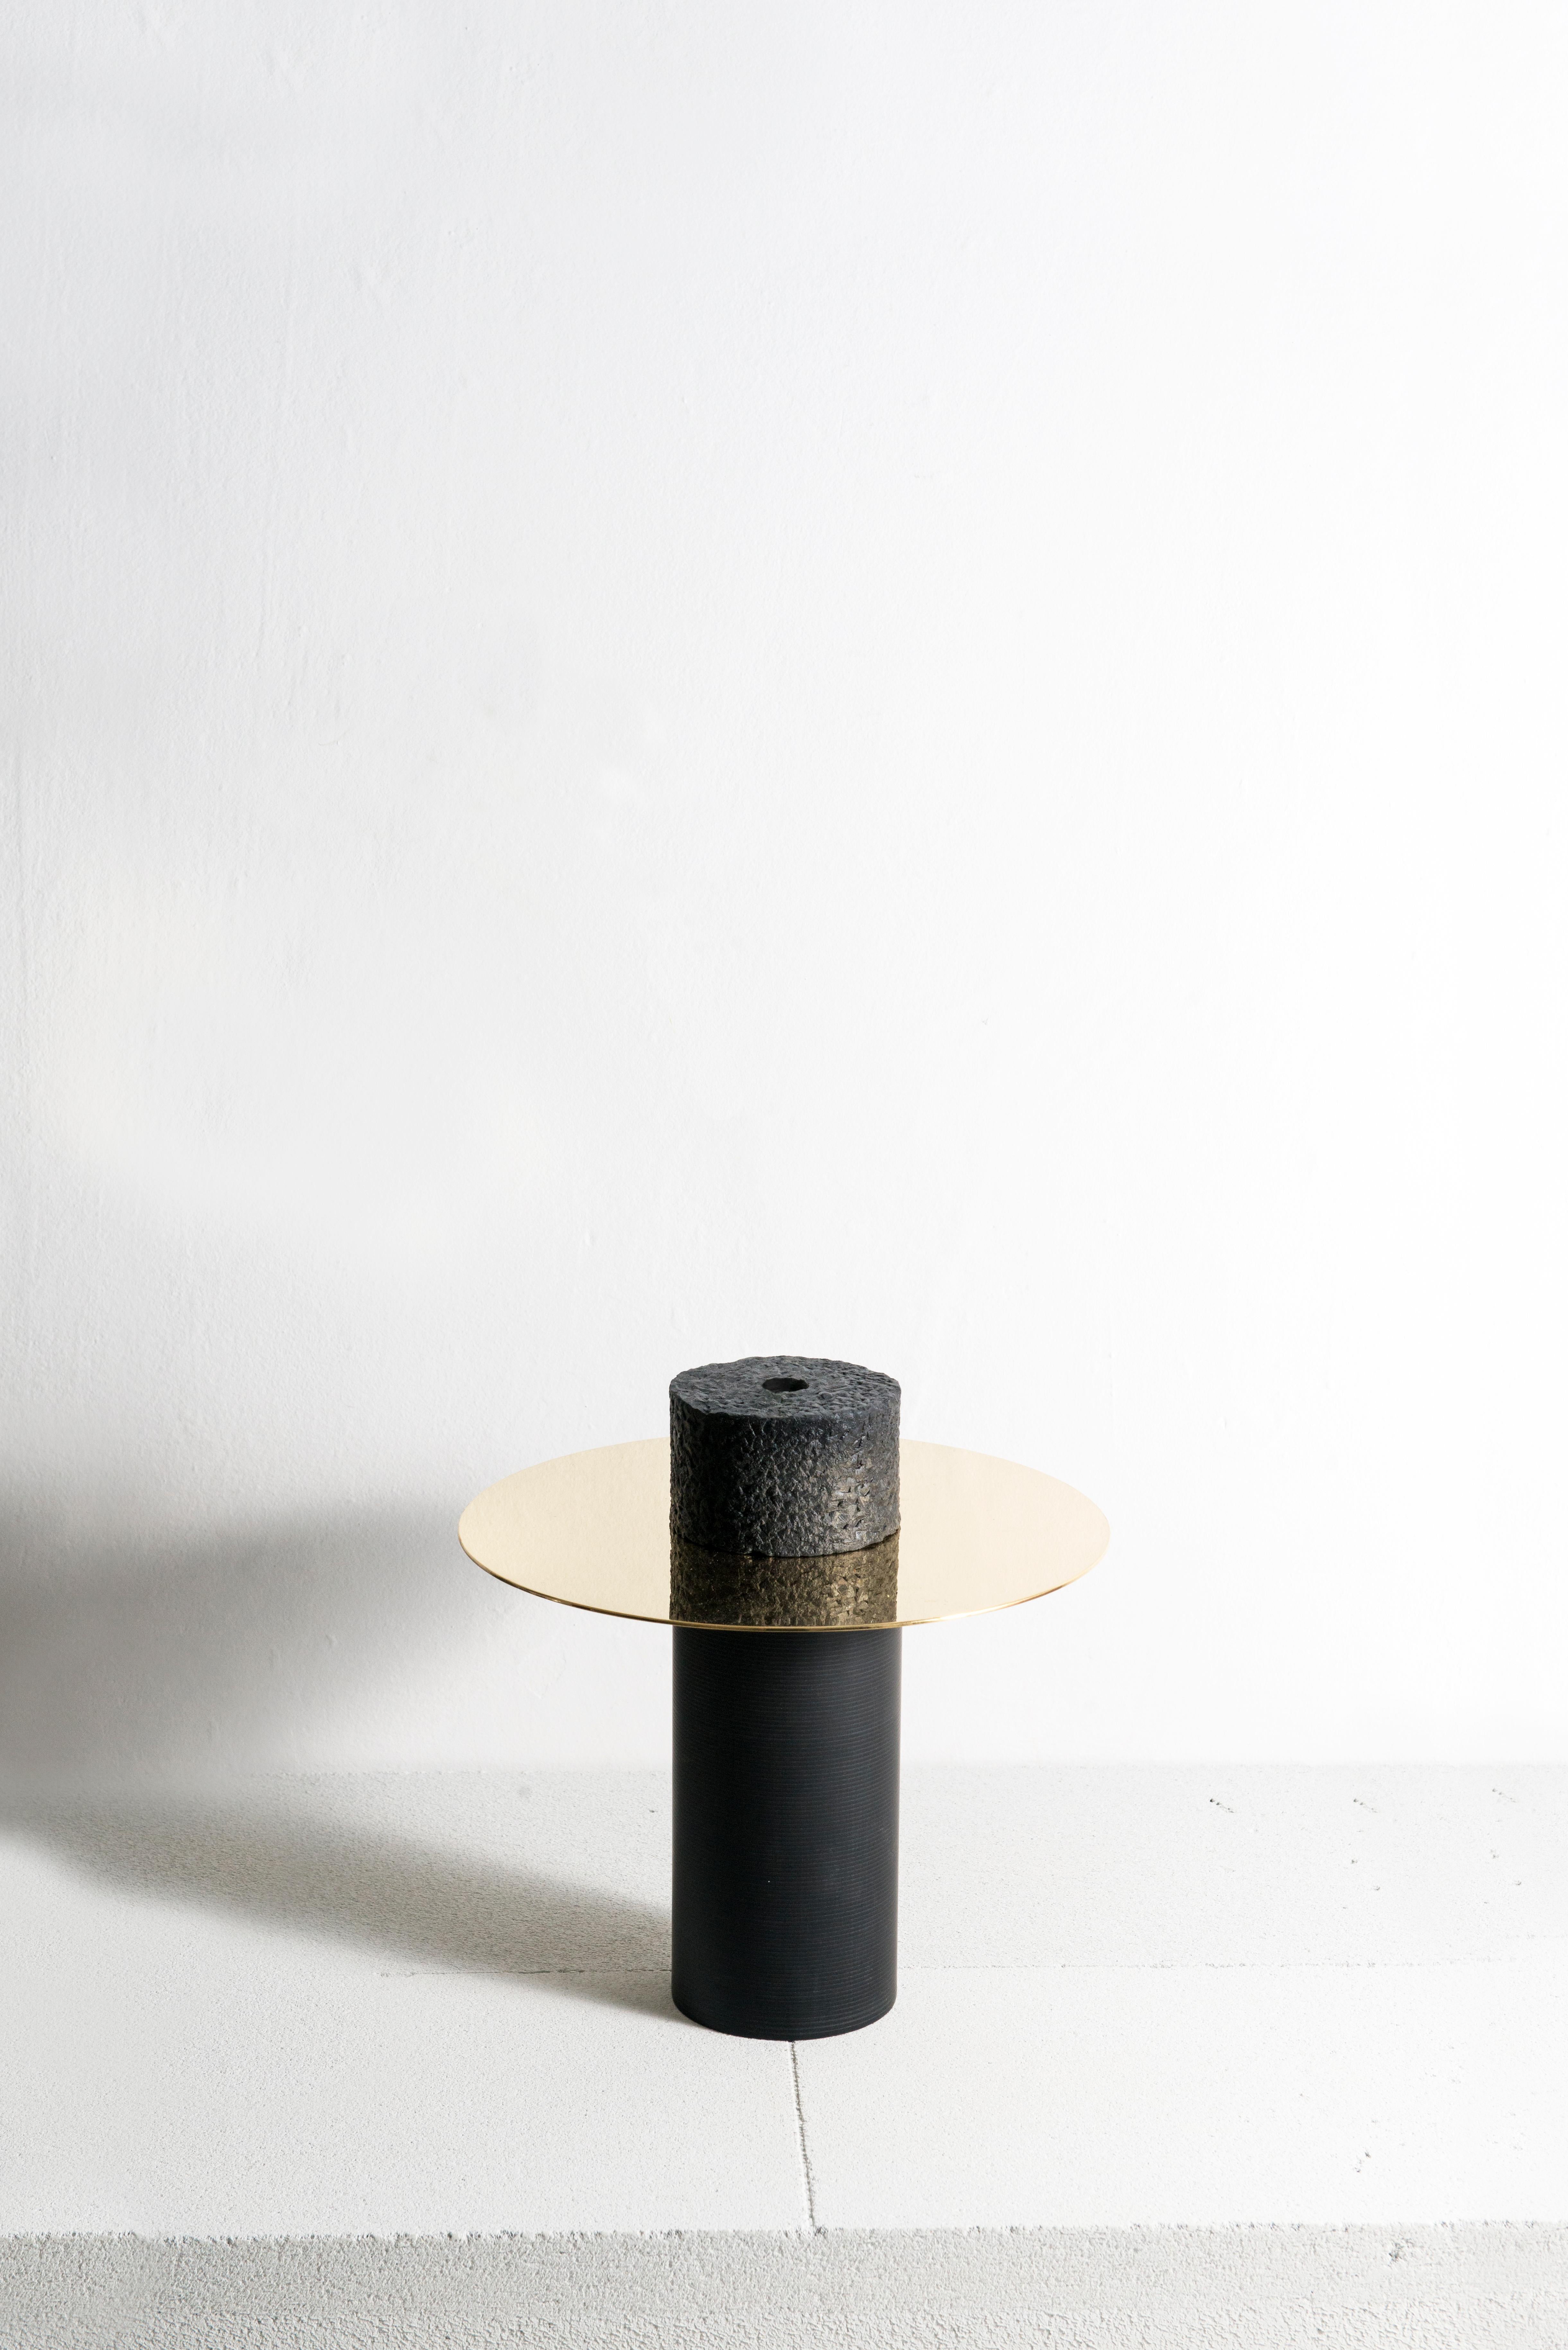 Cavi N.1 Vase in Lavagna Stone or Ardesia and Polished Brass, Limited Edition For Sale 5